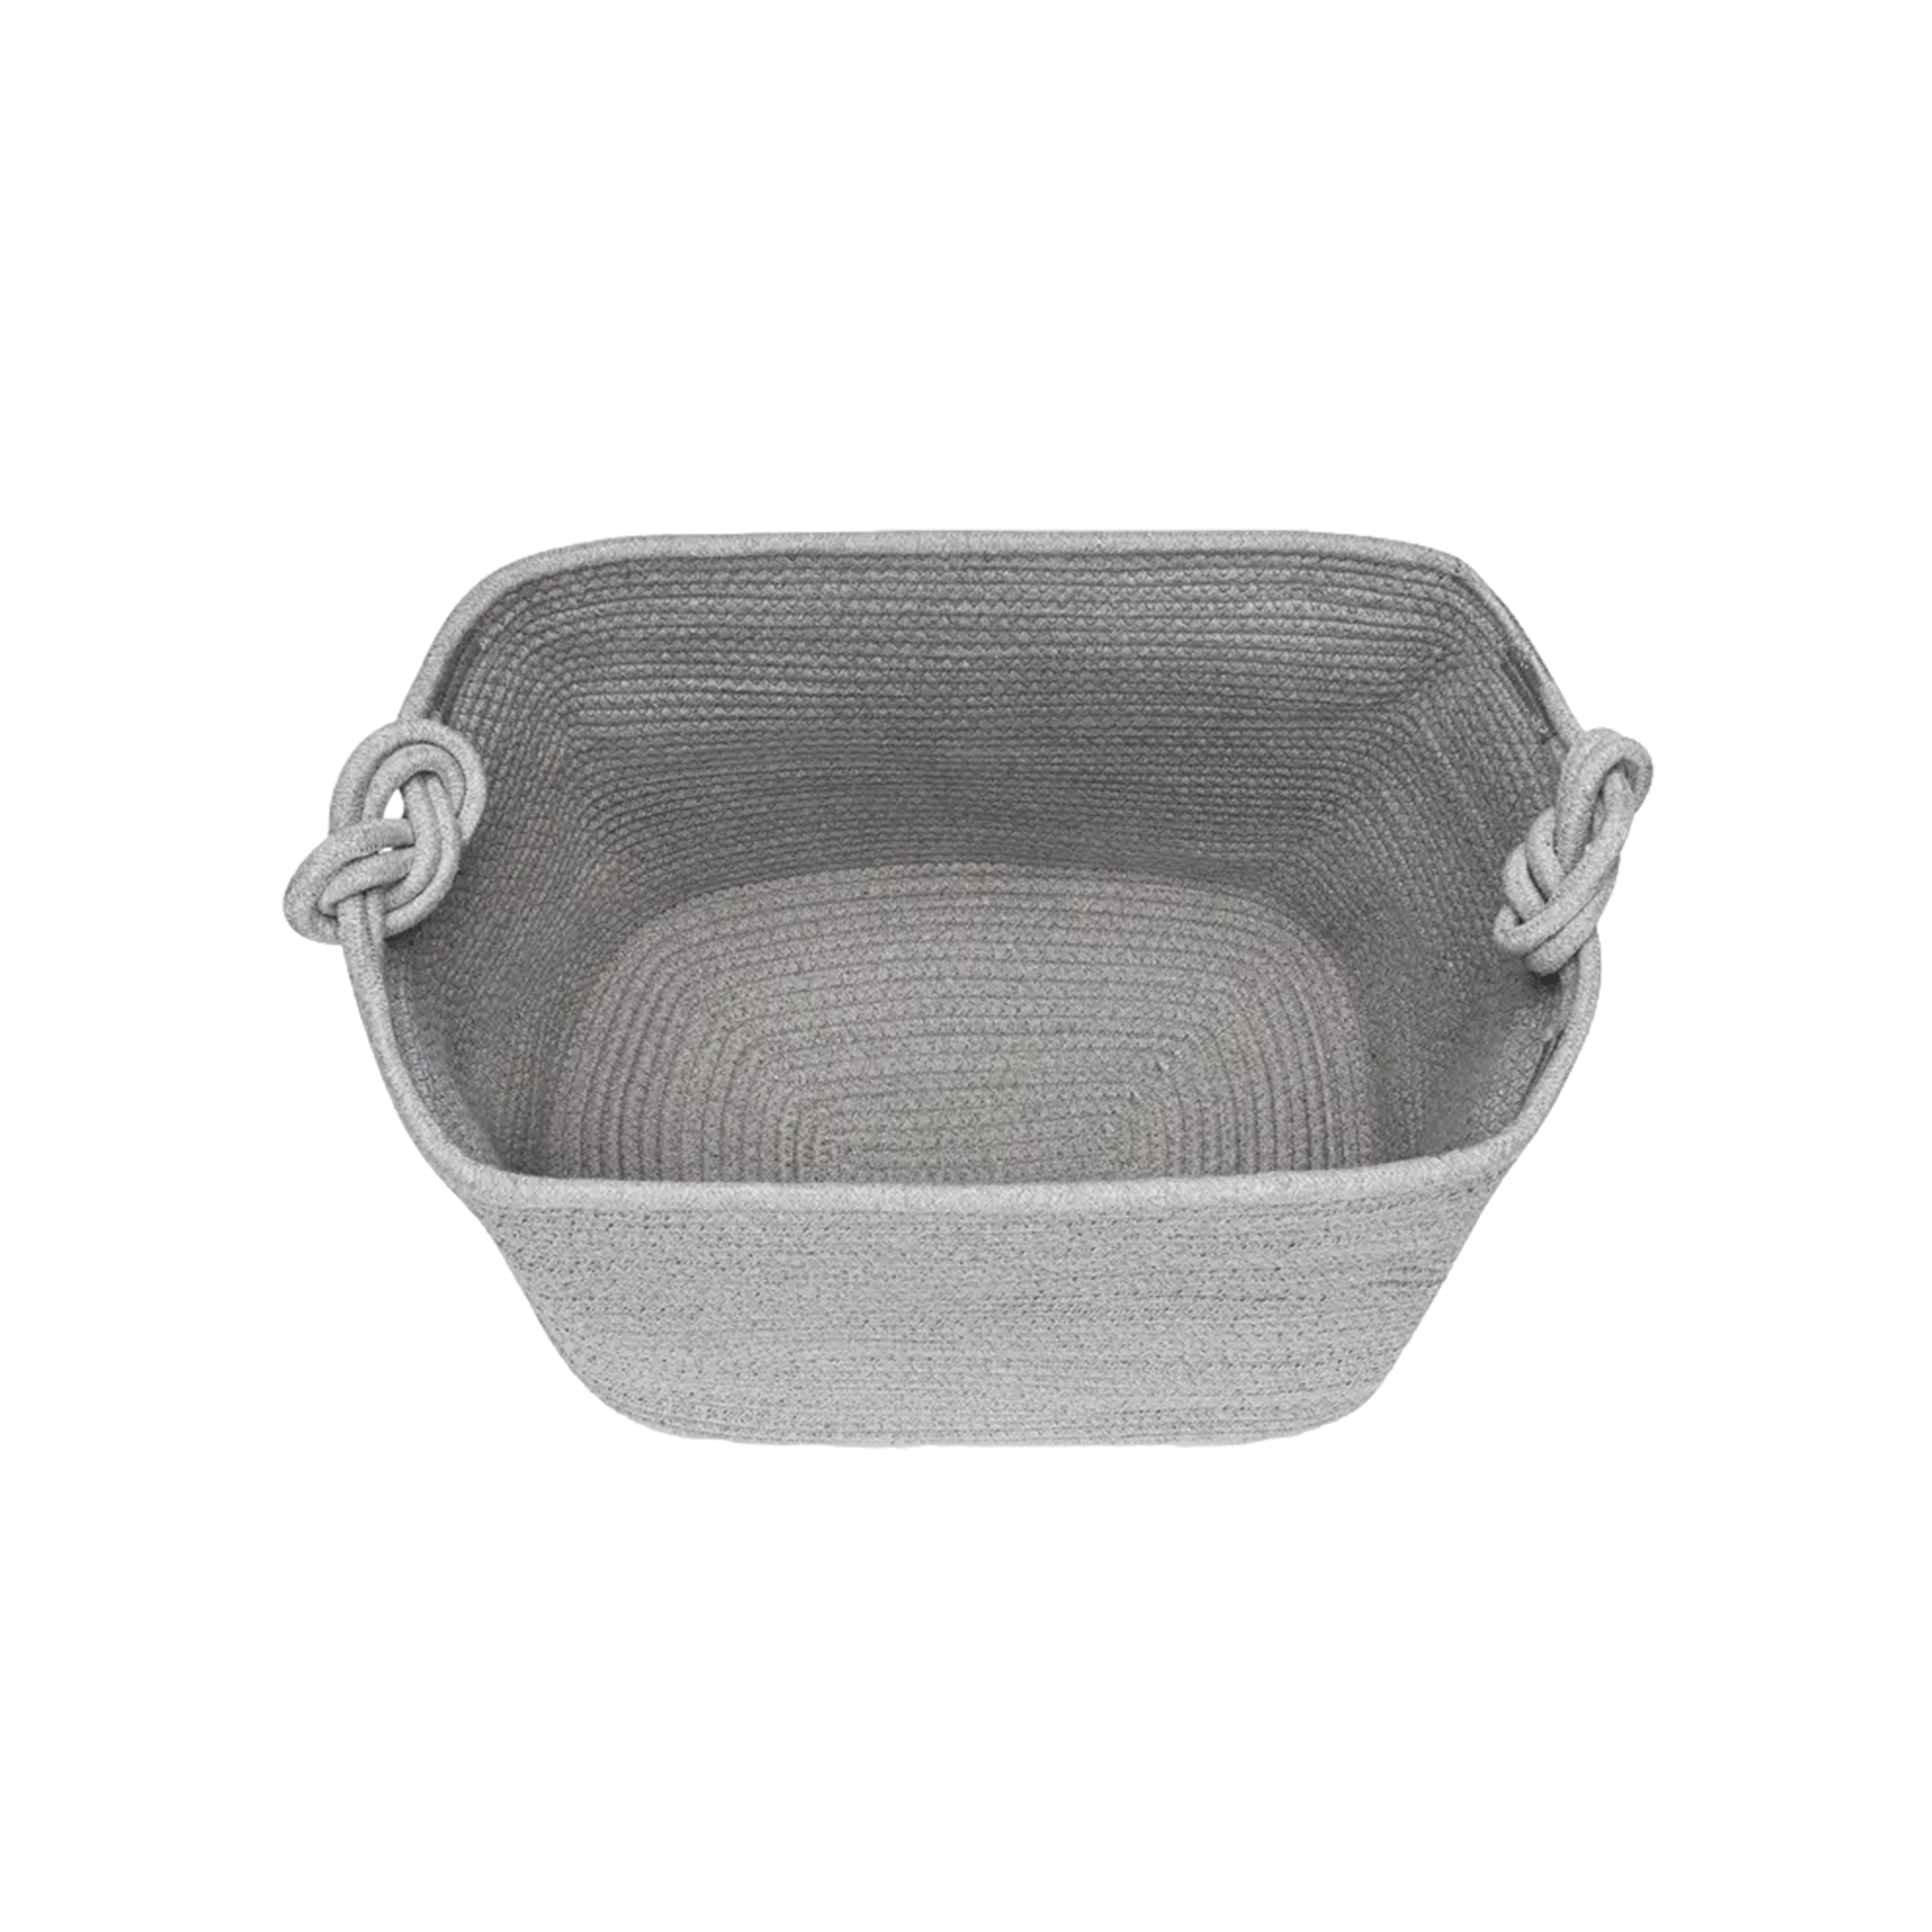 Rope Cube Storage Basket in Gray